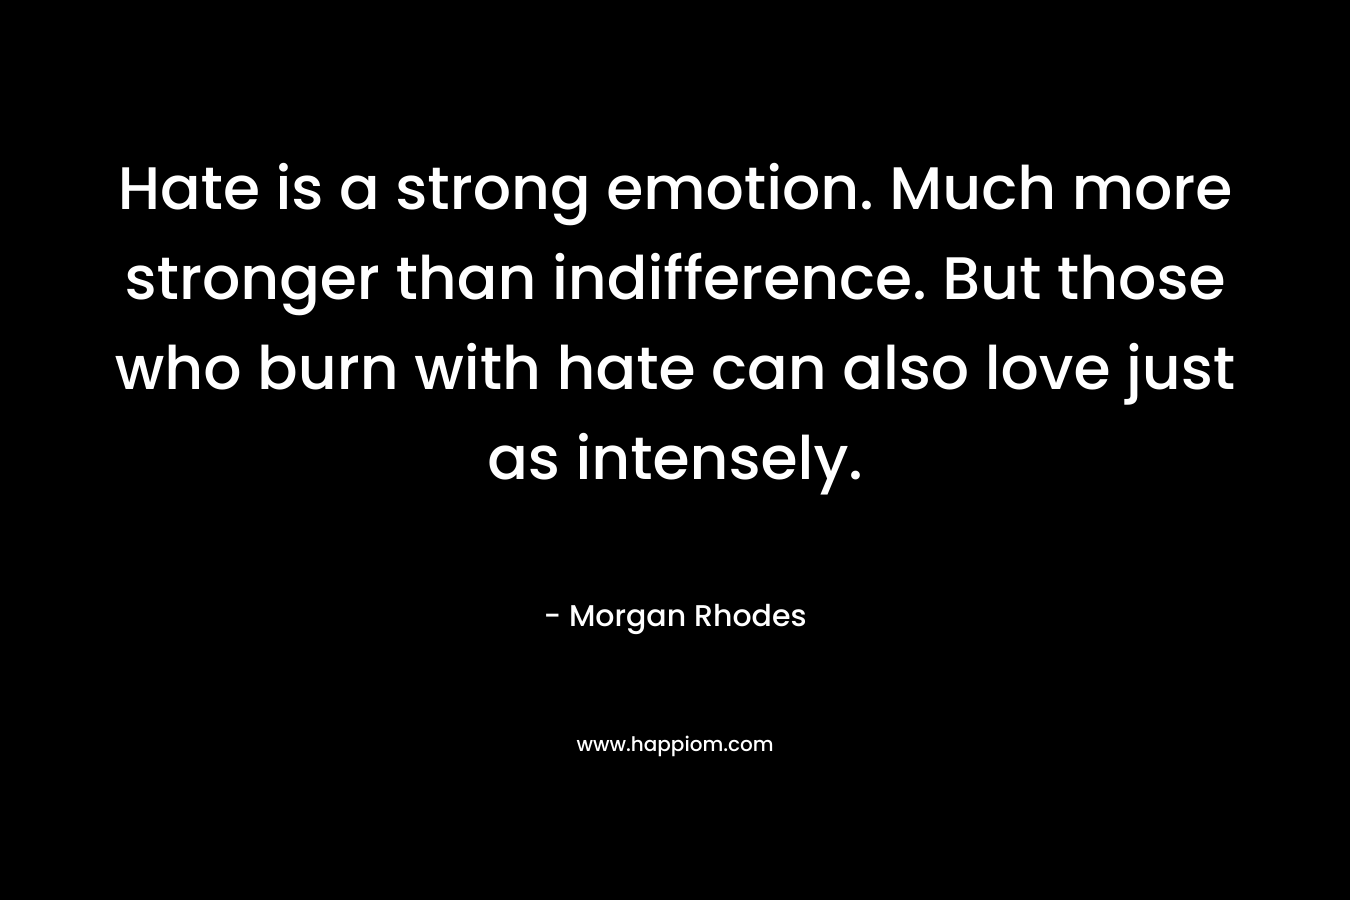 Hate is a strong emotion. Much more stronger than indifference. But those who burn with hate can also love just as intensely.